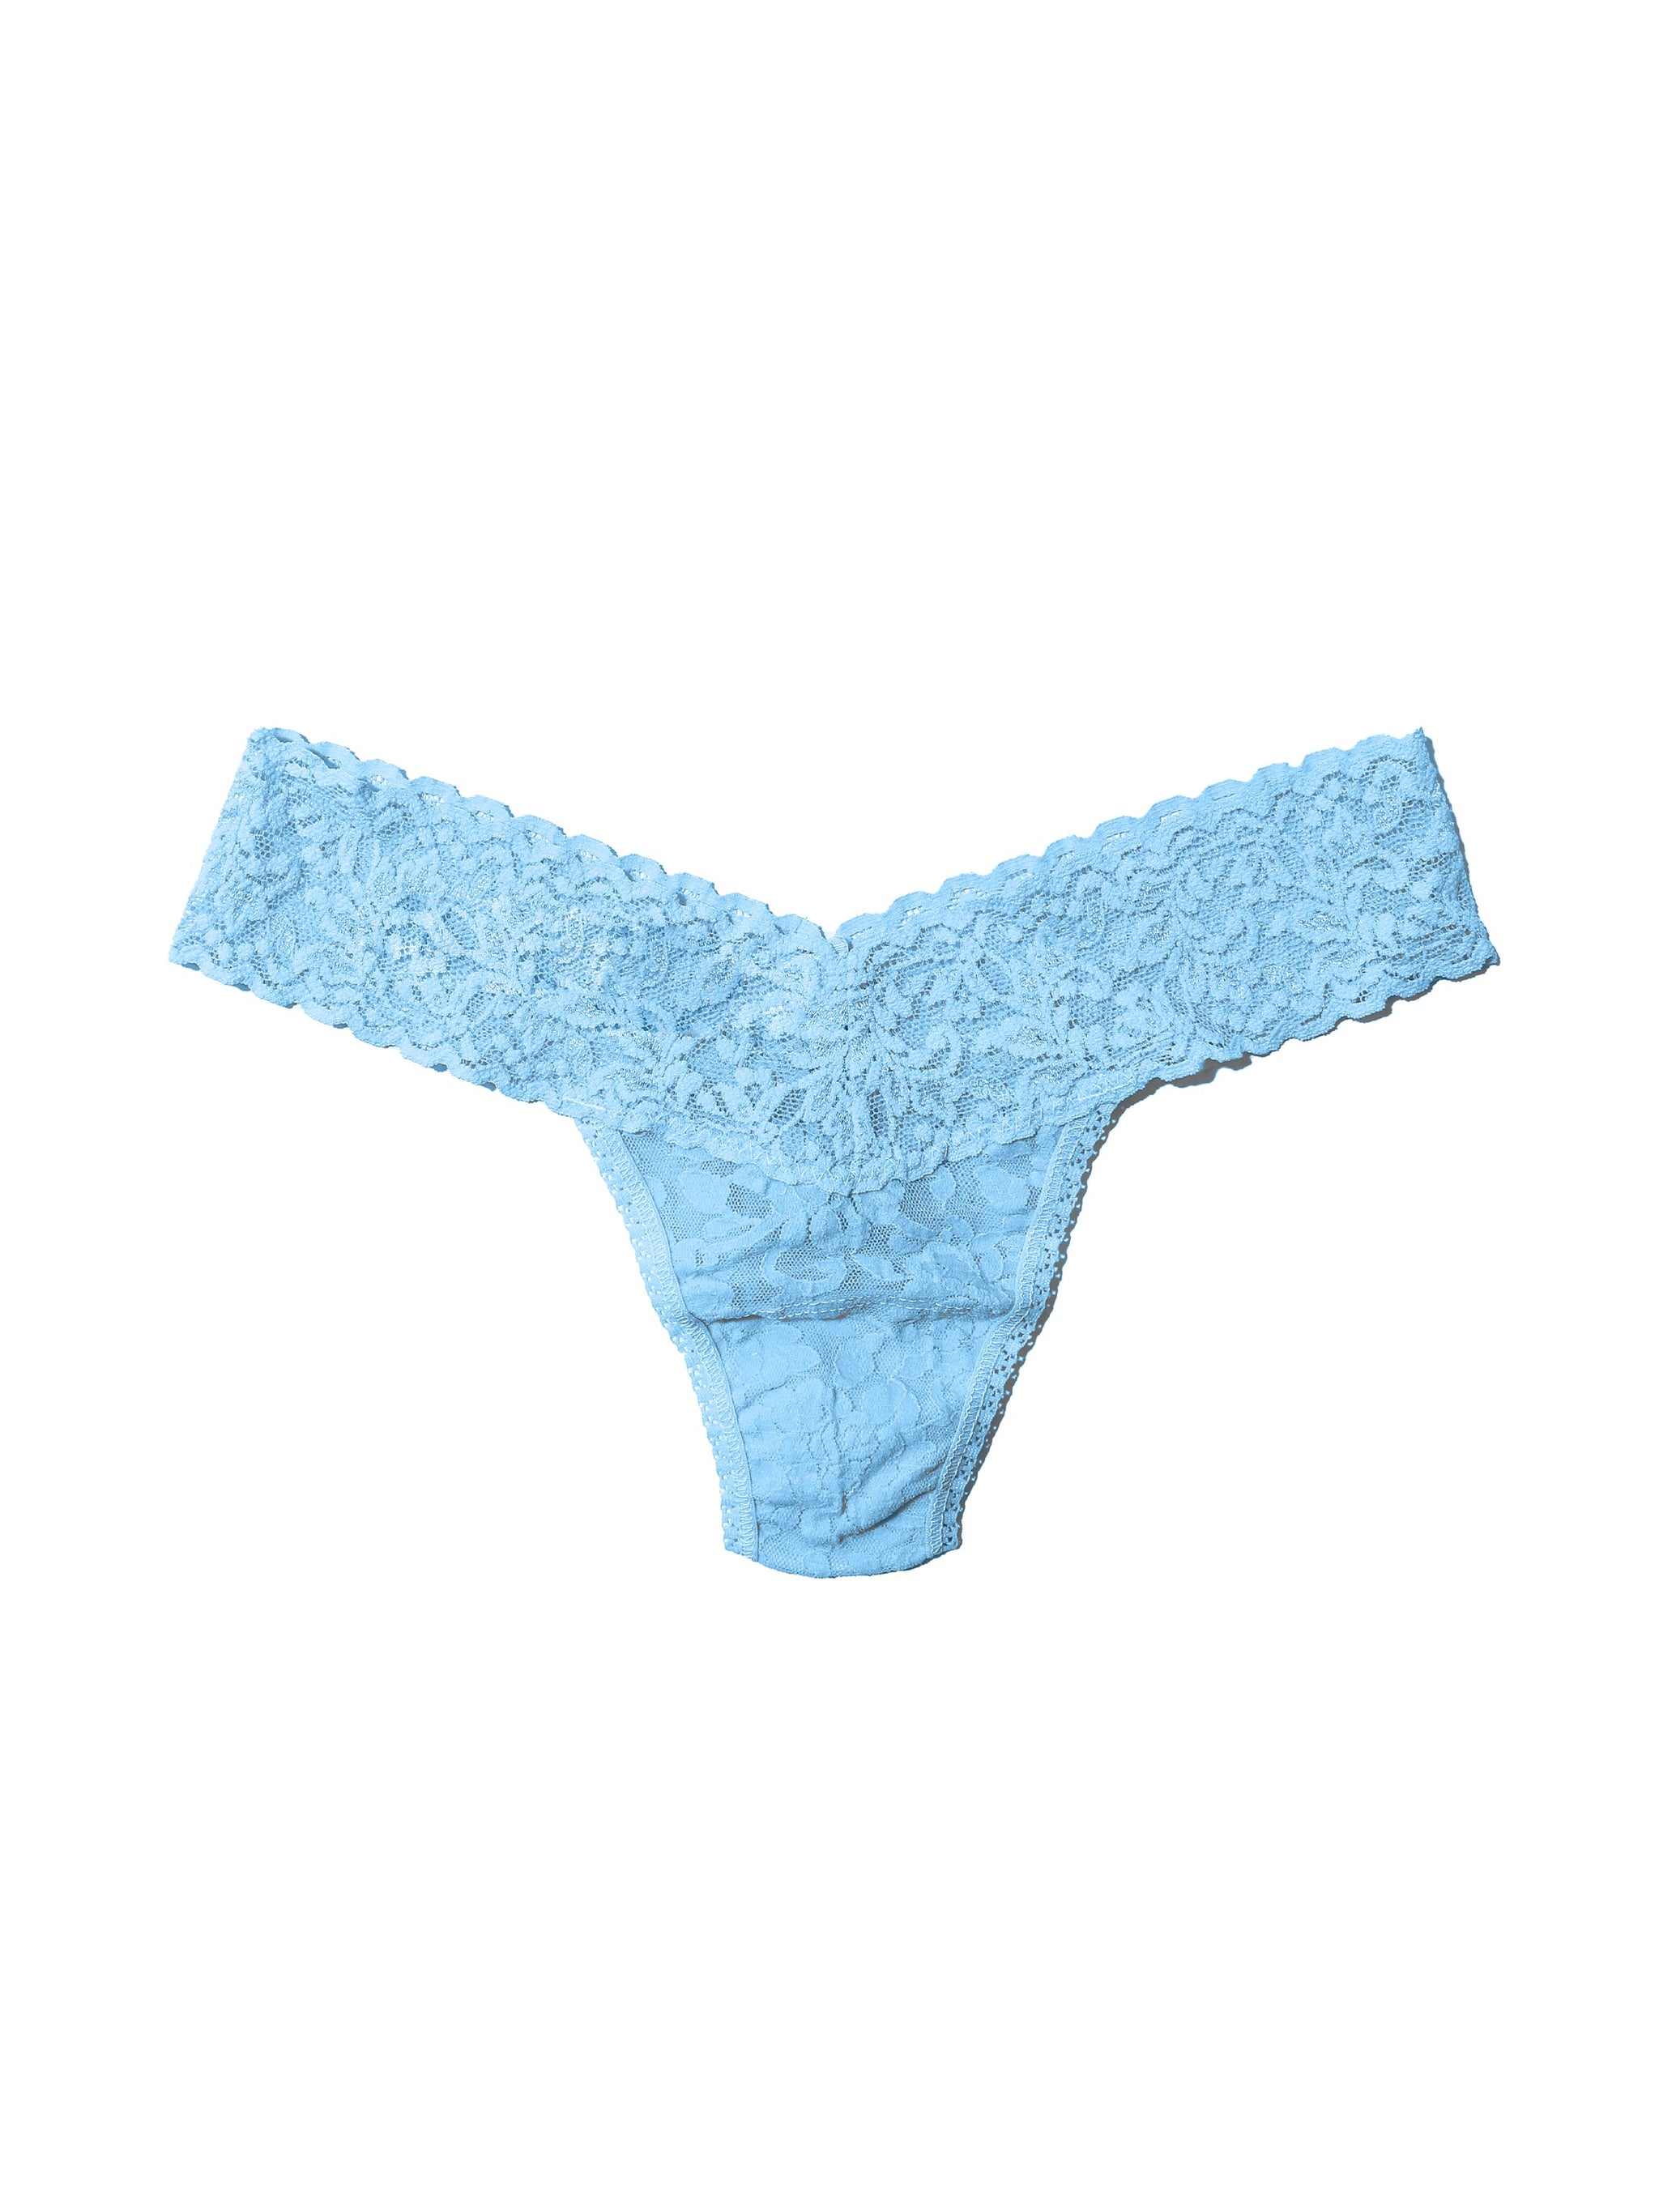 https://www.hankypanky.com/cdn/shop/files/Hanky-Panky-Petite-Size-Signature-Lace-Low-Rise-Thong-Partly-Cloudy-Blue-PARTLY-CLOUDY-BLUE-View-1.jpg?v=1697053996&width=2048